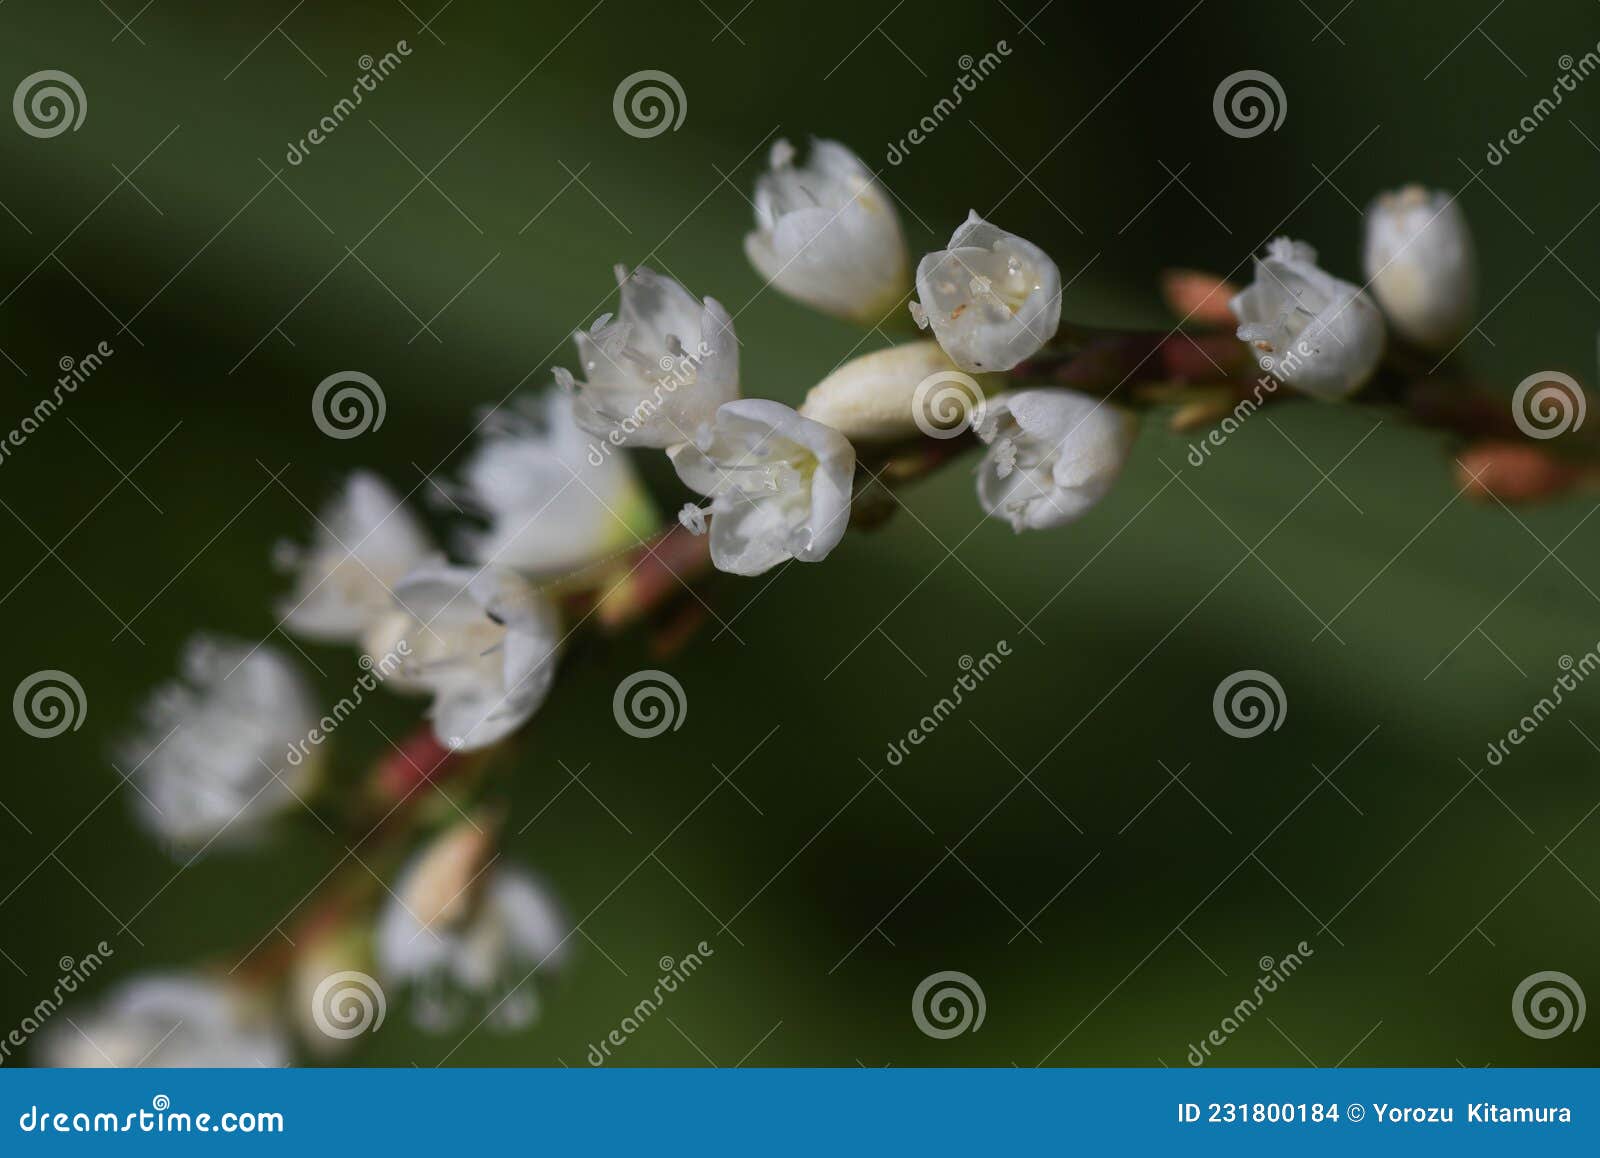 persicaria japonica flowers.